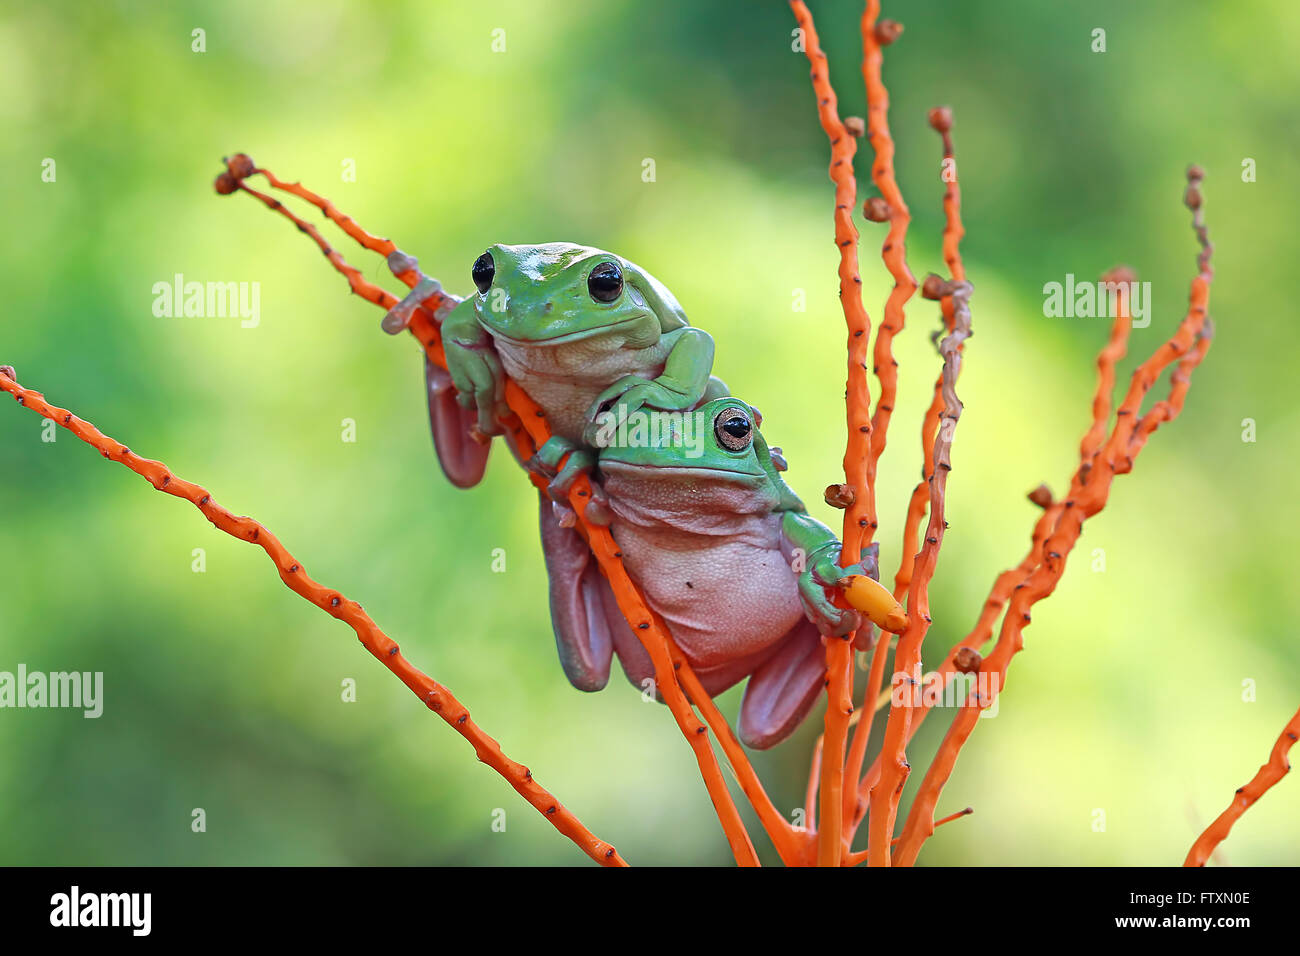 Two Dumpy tree frogs sitting on plant, Indonesia Stock Photo